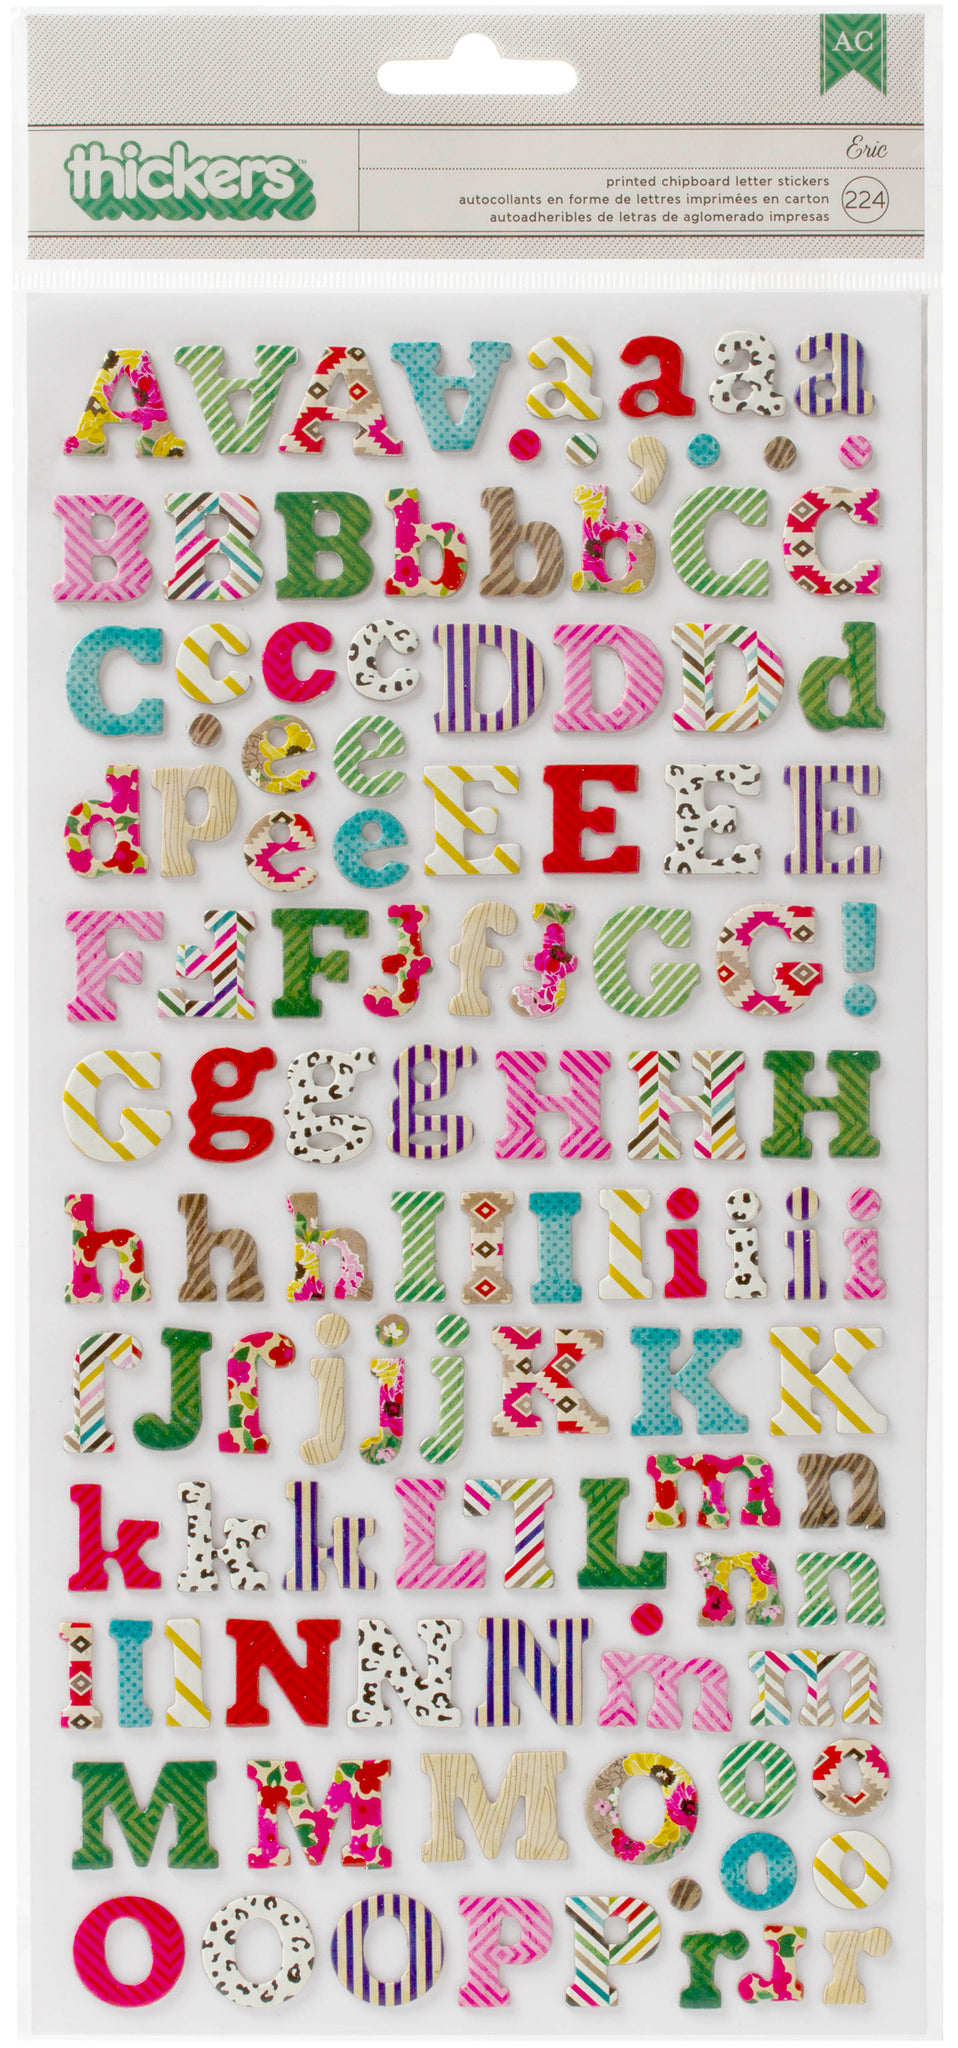 333313 On Trend Thickers Alphabet Stickers 5.5"X11" 224/Pkg Eric/Multi Print Chipboard